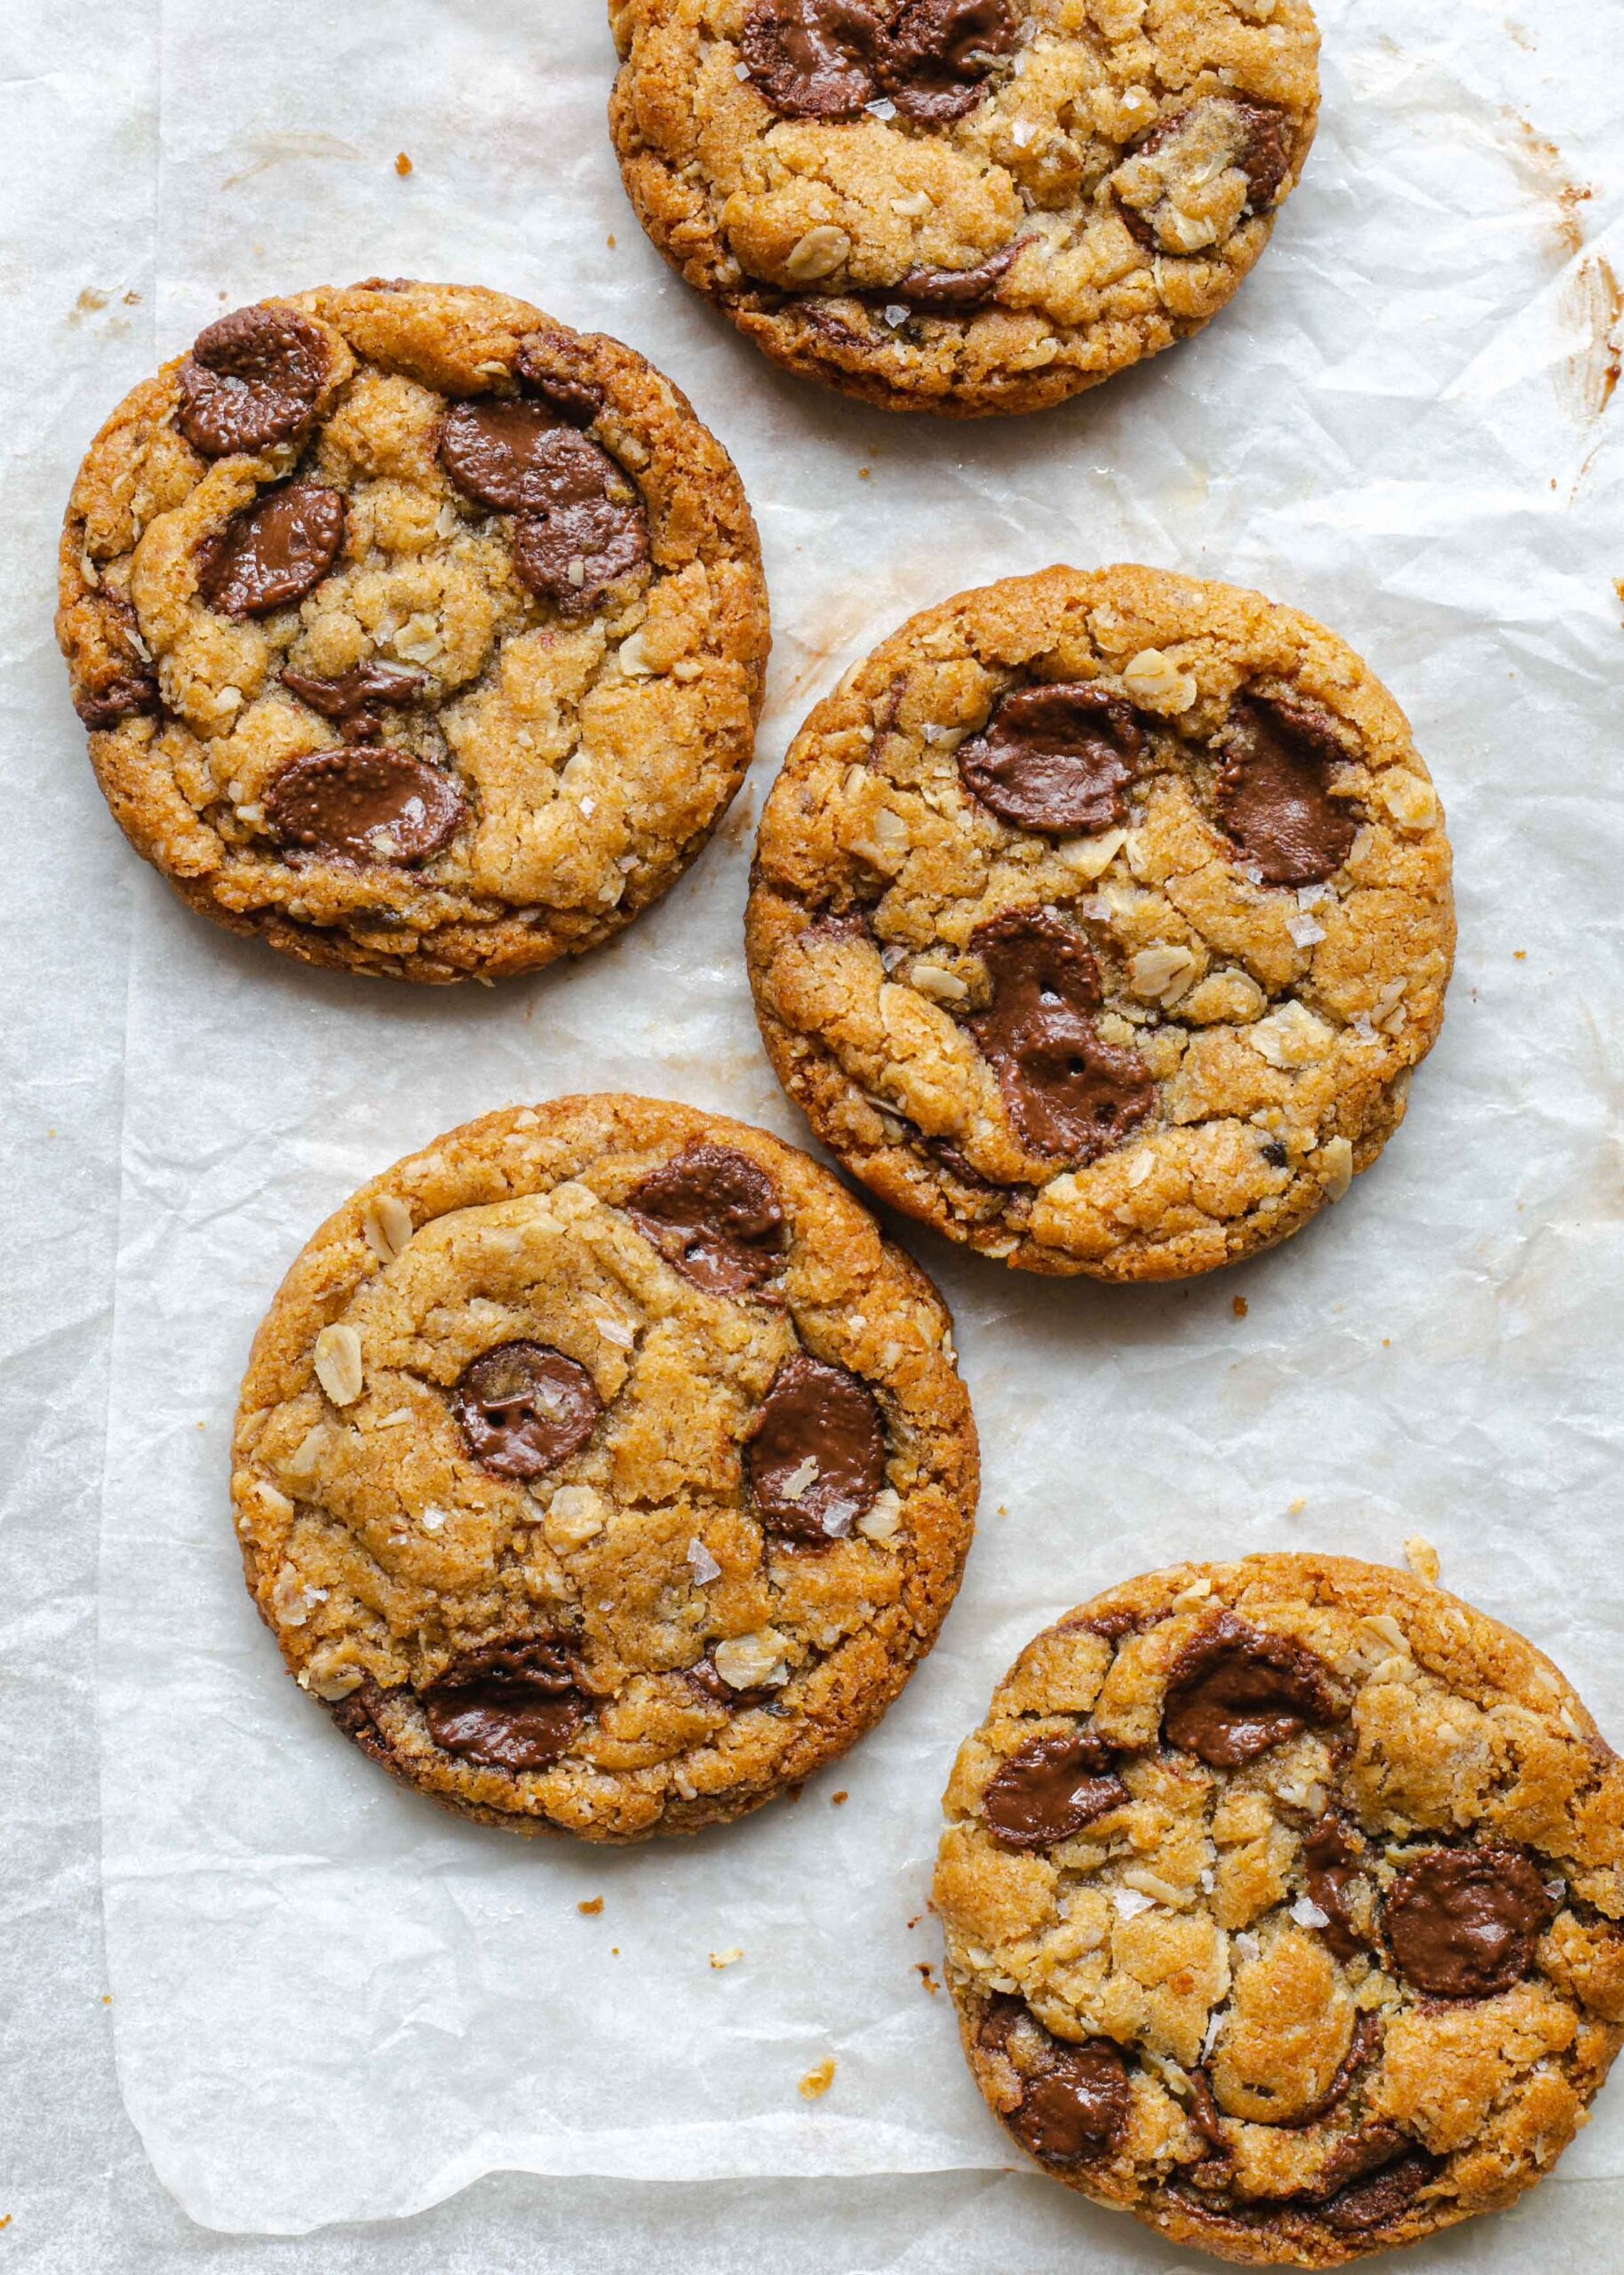 Chewy, crispy gluten free cookies with pools of melted chocolate